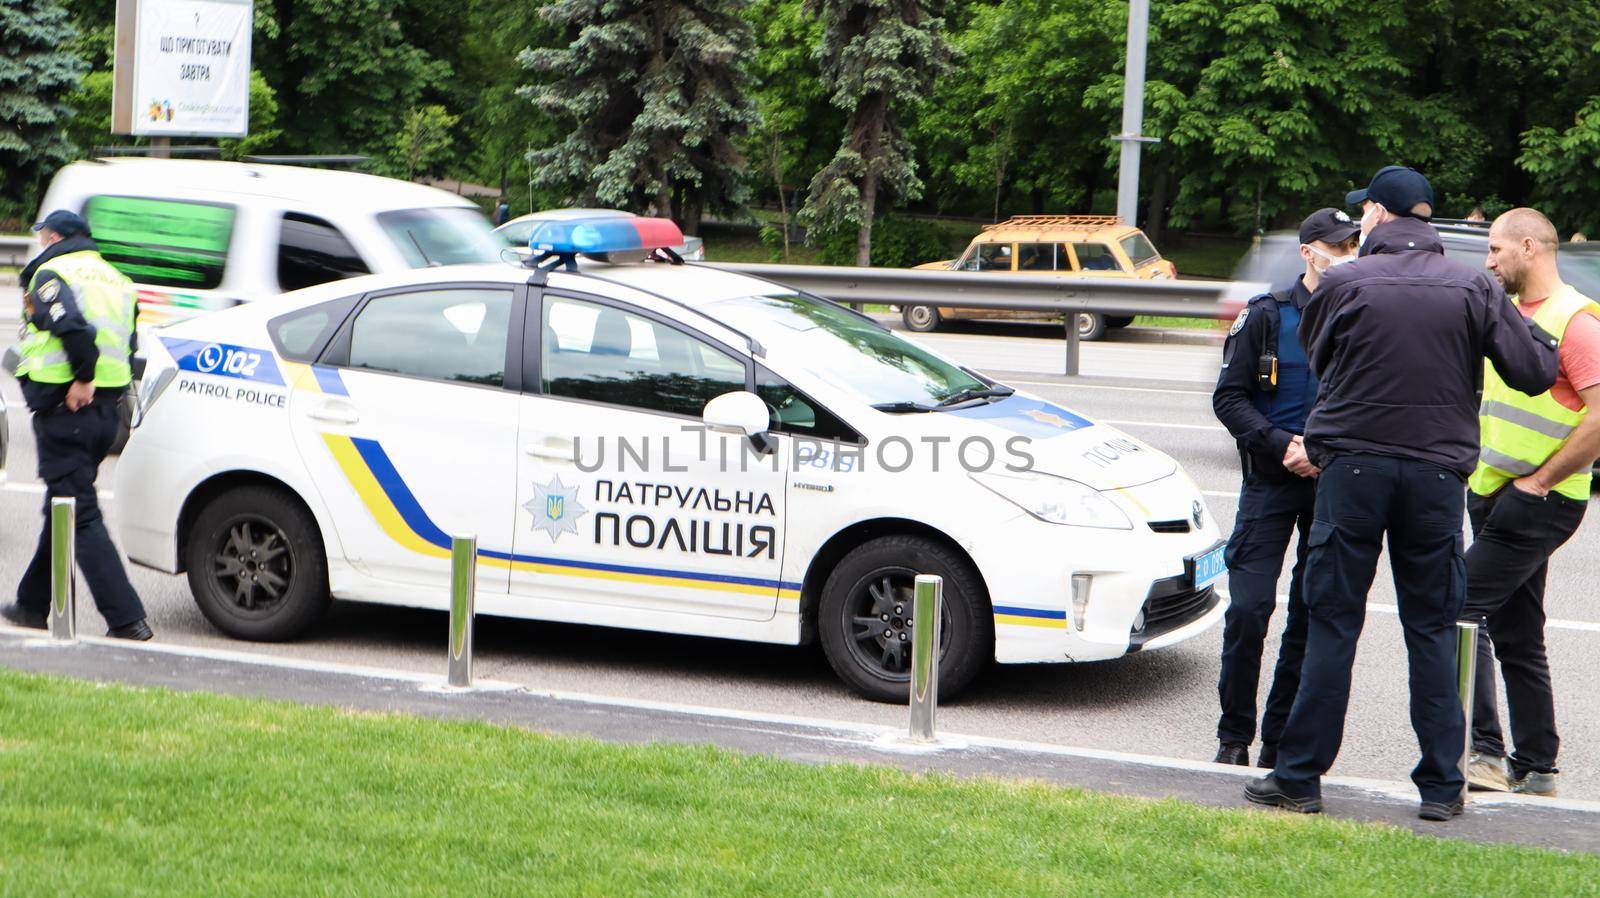 Ukraine, Kiev - June 2, 2020. Police patrol cars provide safety on the roads of Kiev in Ukraine. A male policeman stands near his car on the roadway by Roshchyn